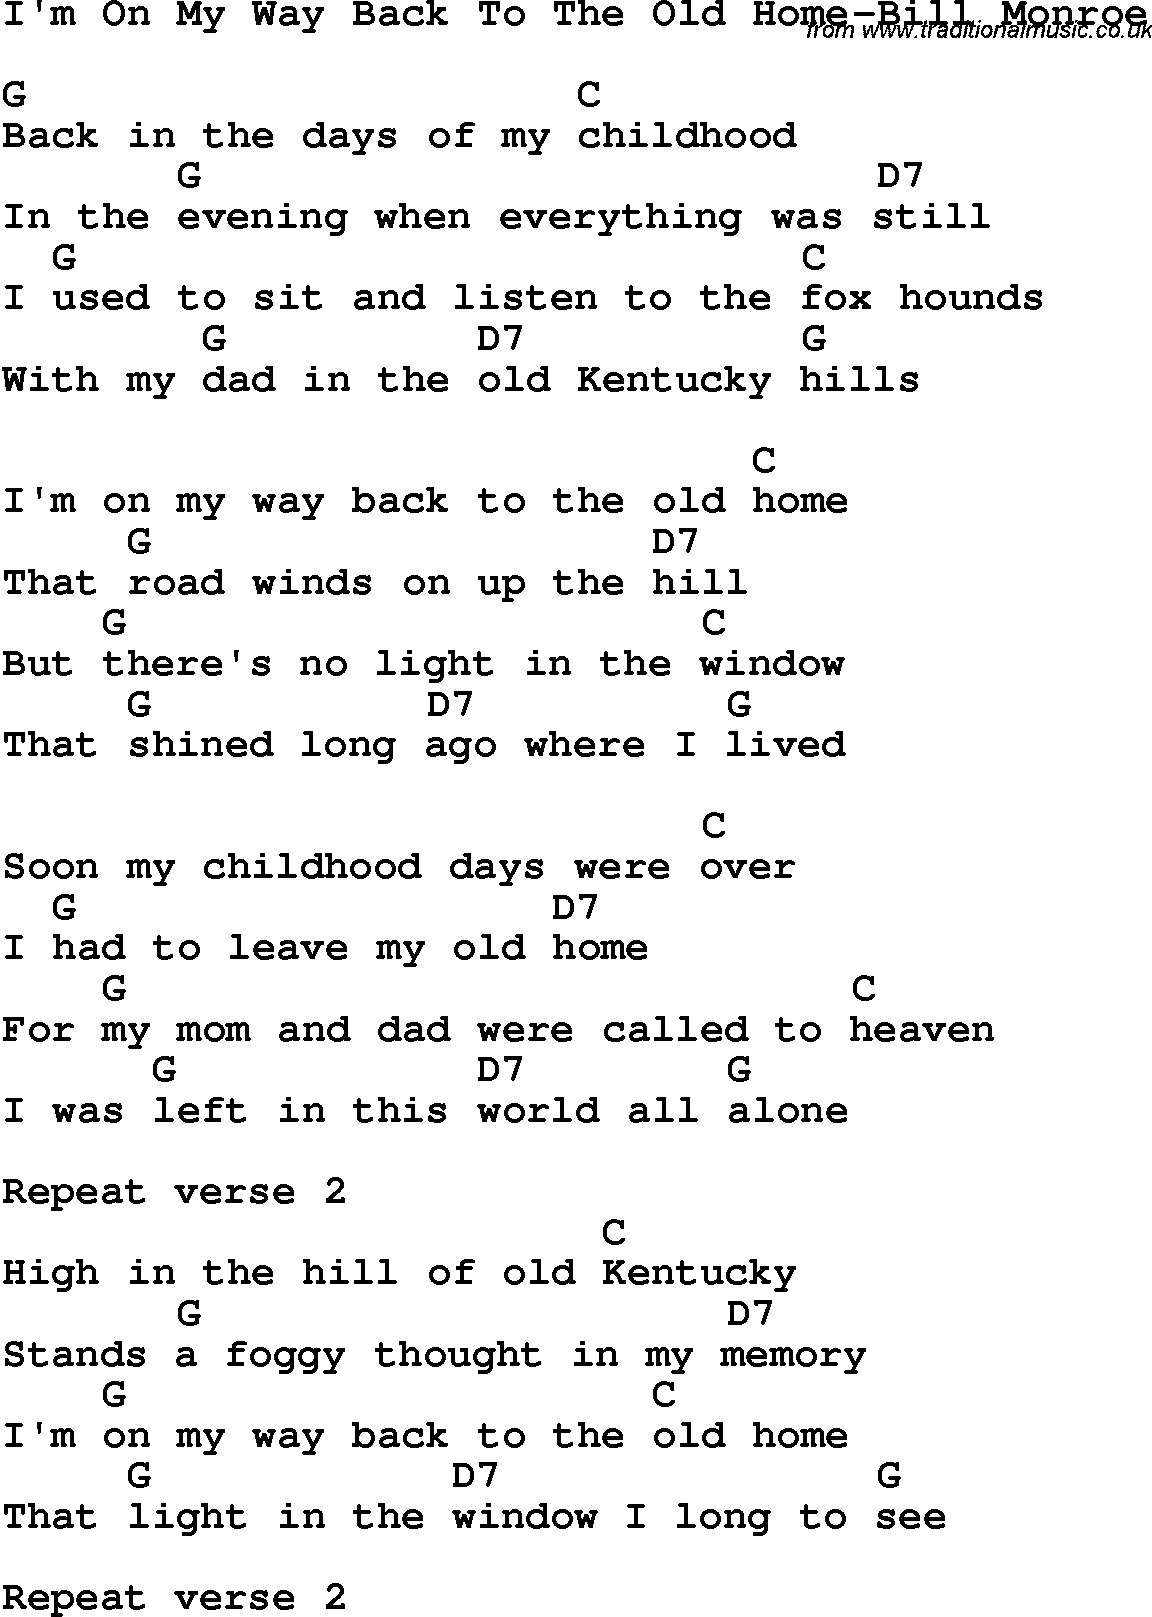 Country, Southern and Bluegrass Gospel Song I'm On My Way Back To The Old Home-Bill Monroe lyrics and chords